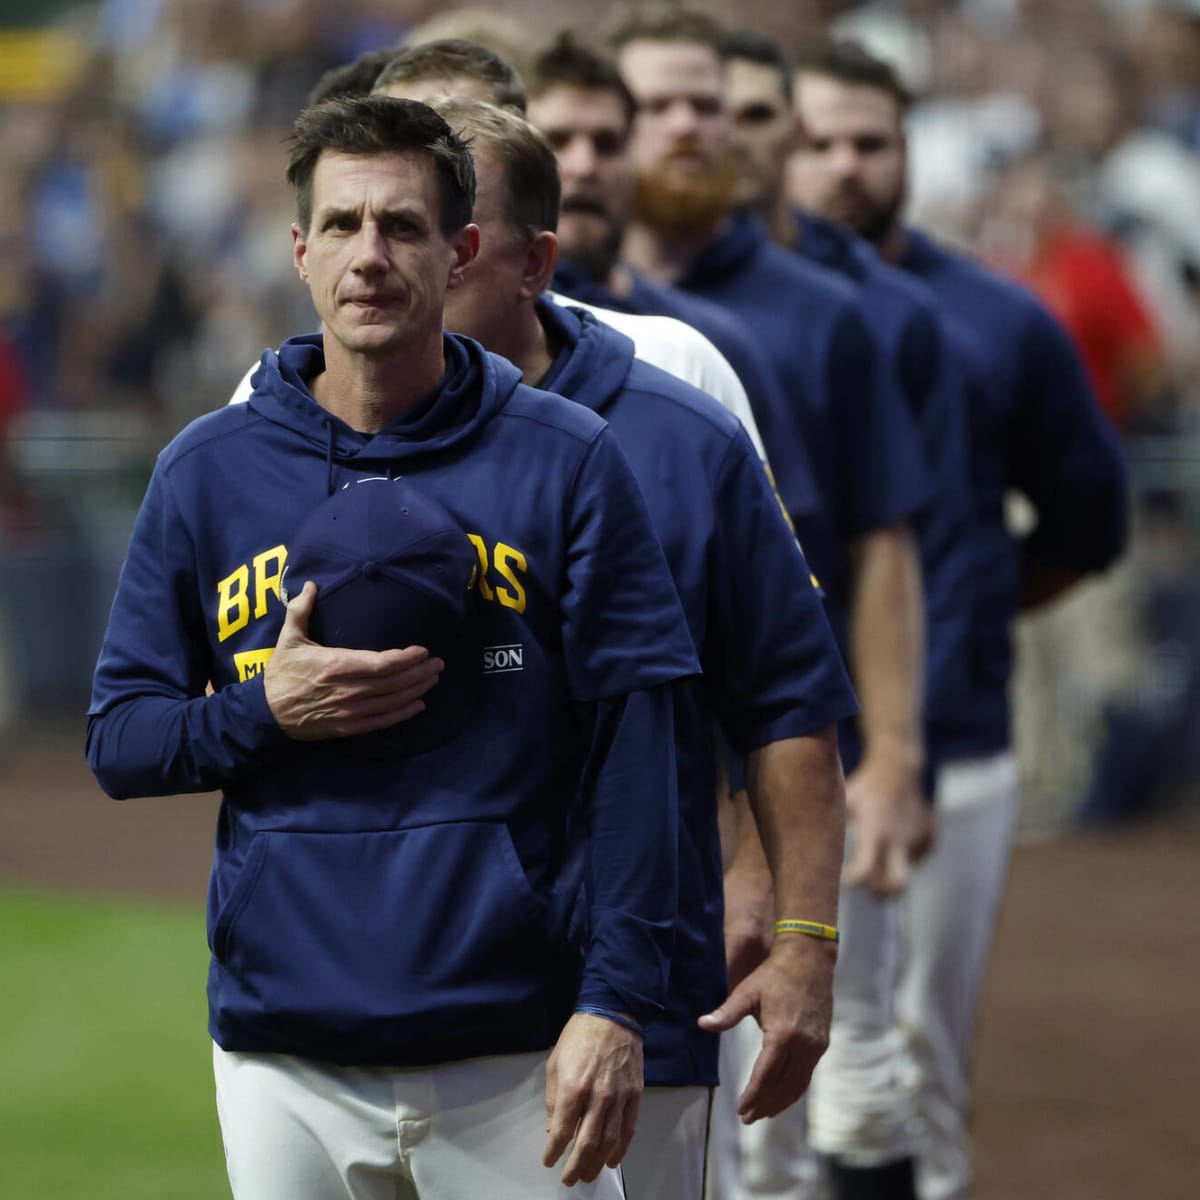 Mets will have to wait few weeks to talk with Craig Counsell